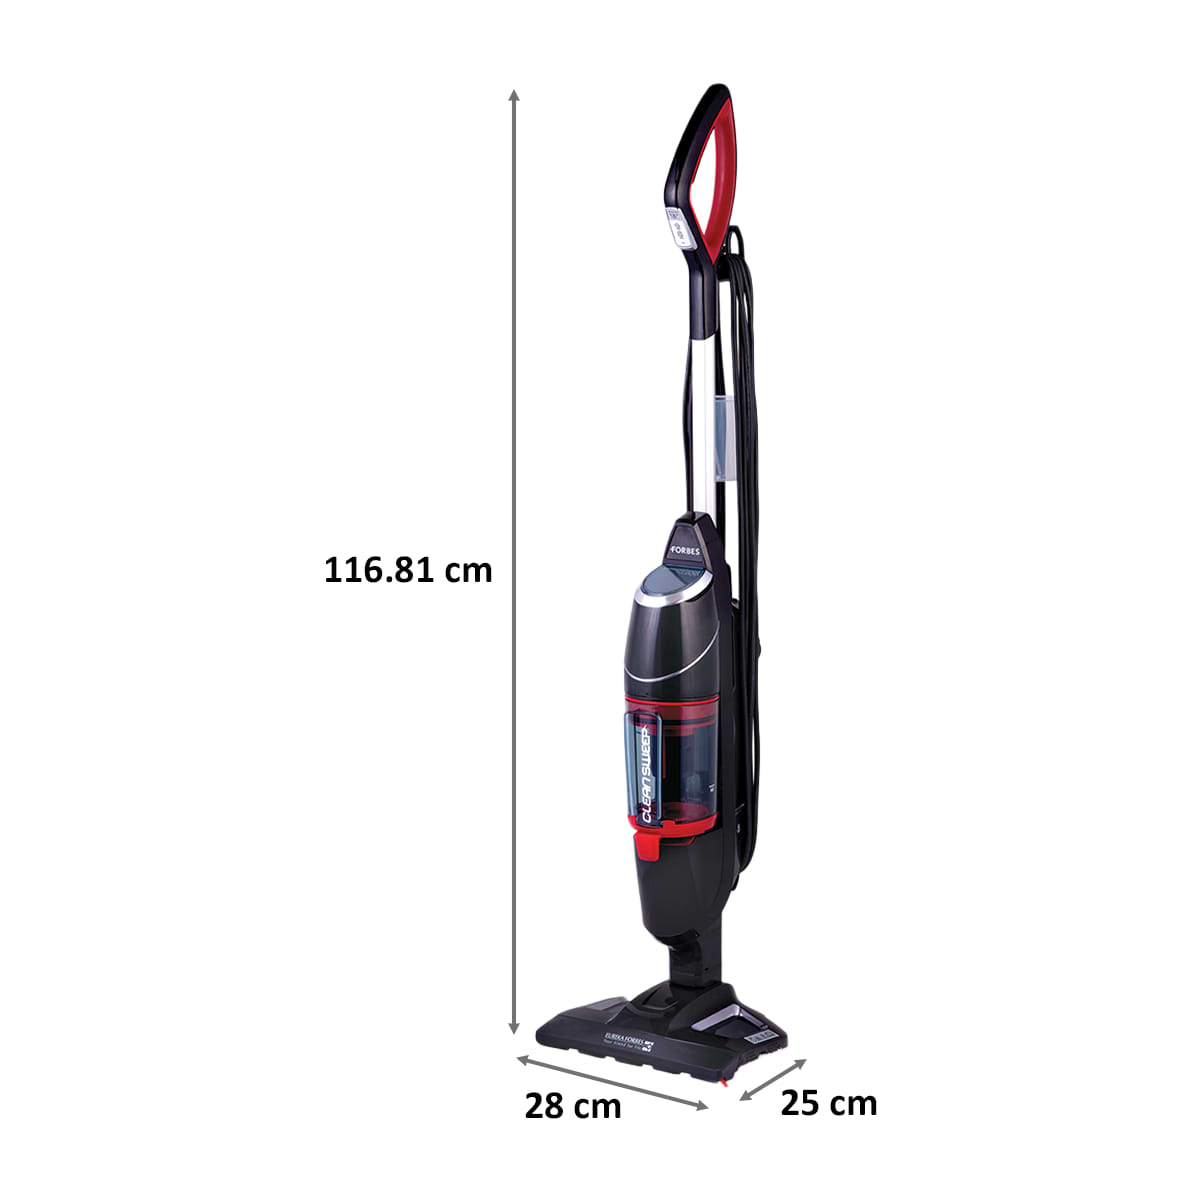 Eureka Forbes Clean Sweep 0.5 Litres Wet & Dry Vacuum Cleaner (GFCDCLNSWP0000, Red/Black)